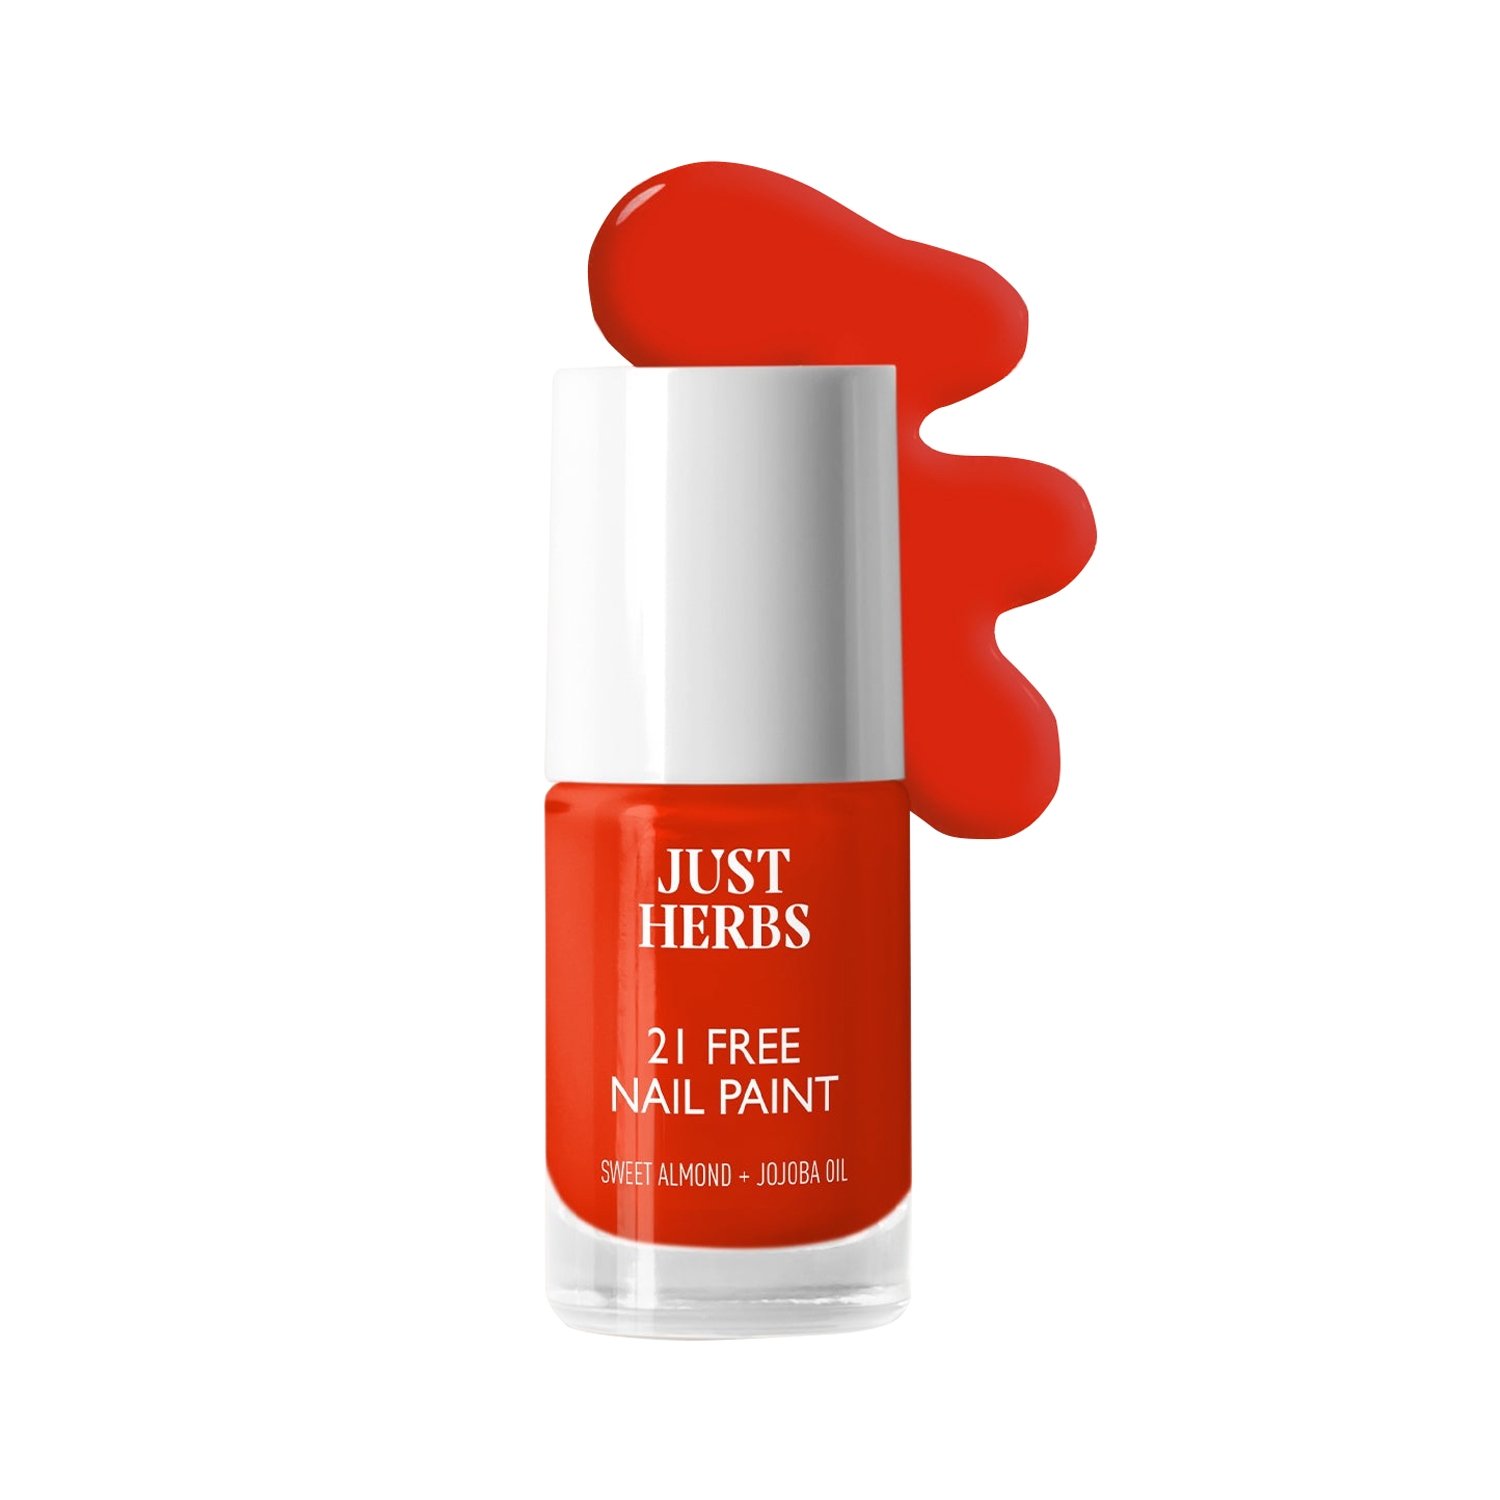 Just Herbs | Just Herbs 21 Chemical Free Nail Polish - Cherry Red (6ml)